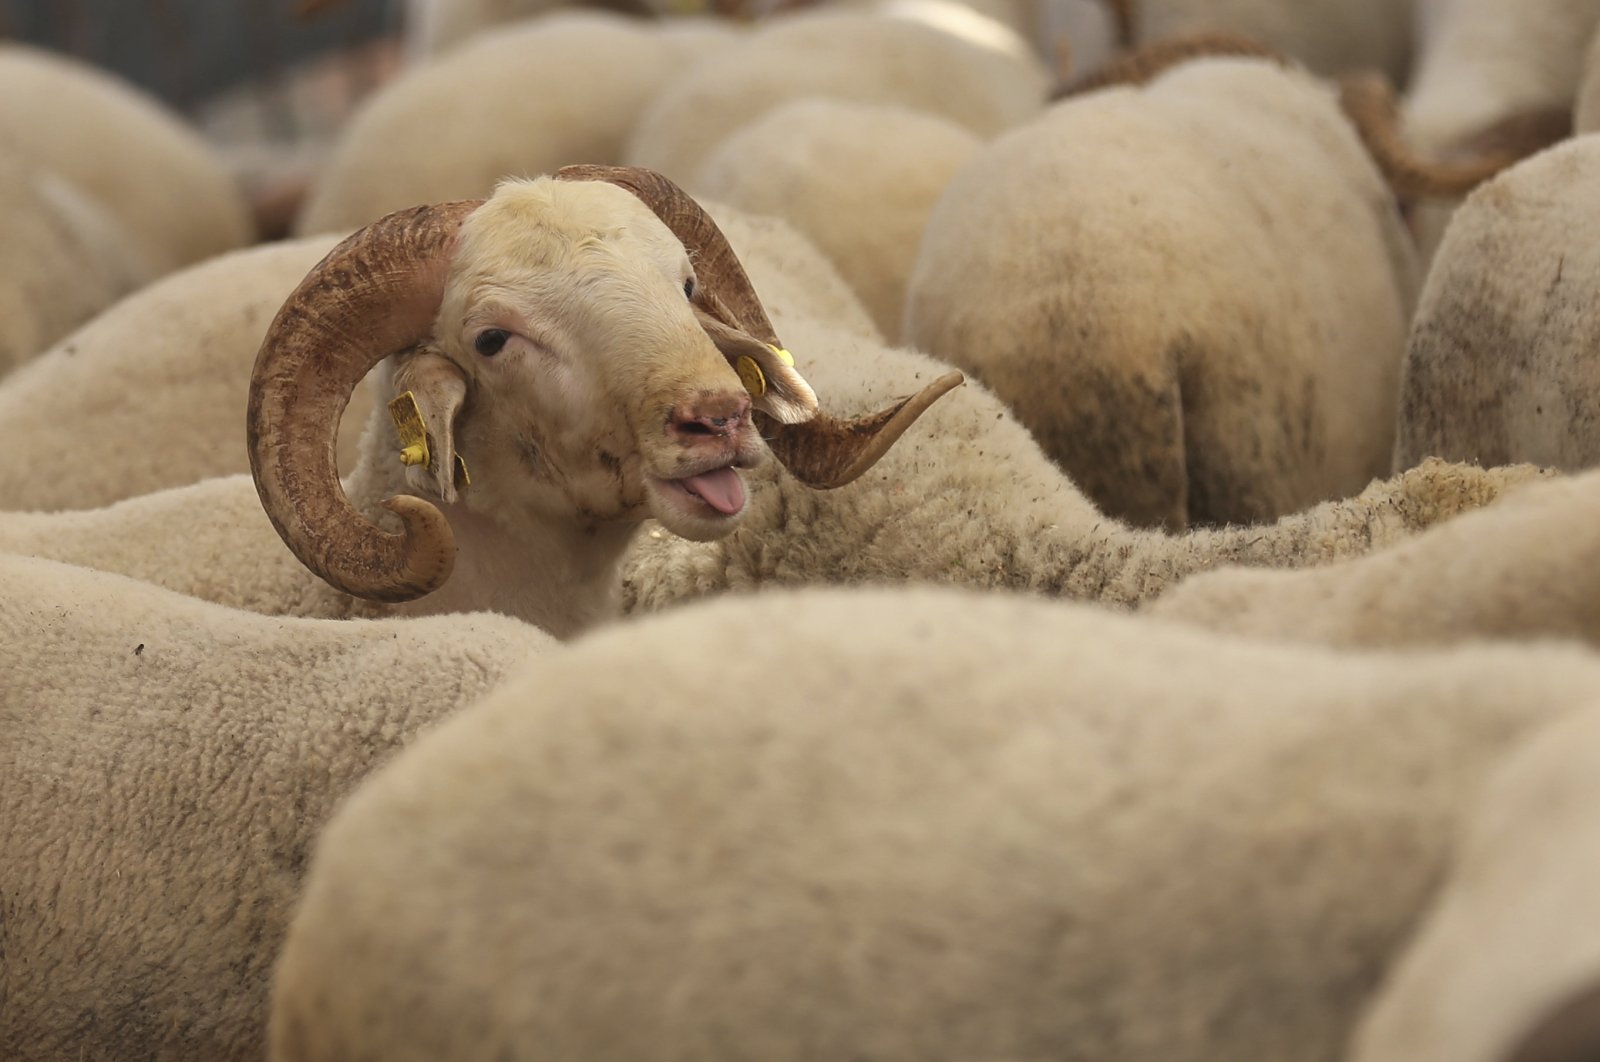 Sheep offered for sale, at an animal market, in preparation for the upcoming Muslim holiday of Qurban Bayram, also called Eid al-Adha or feast of the sacrifice, in Izmir, Turkey, Aug. 19, 2018. (AP Photo)